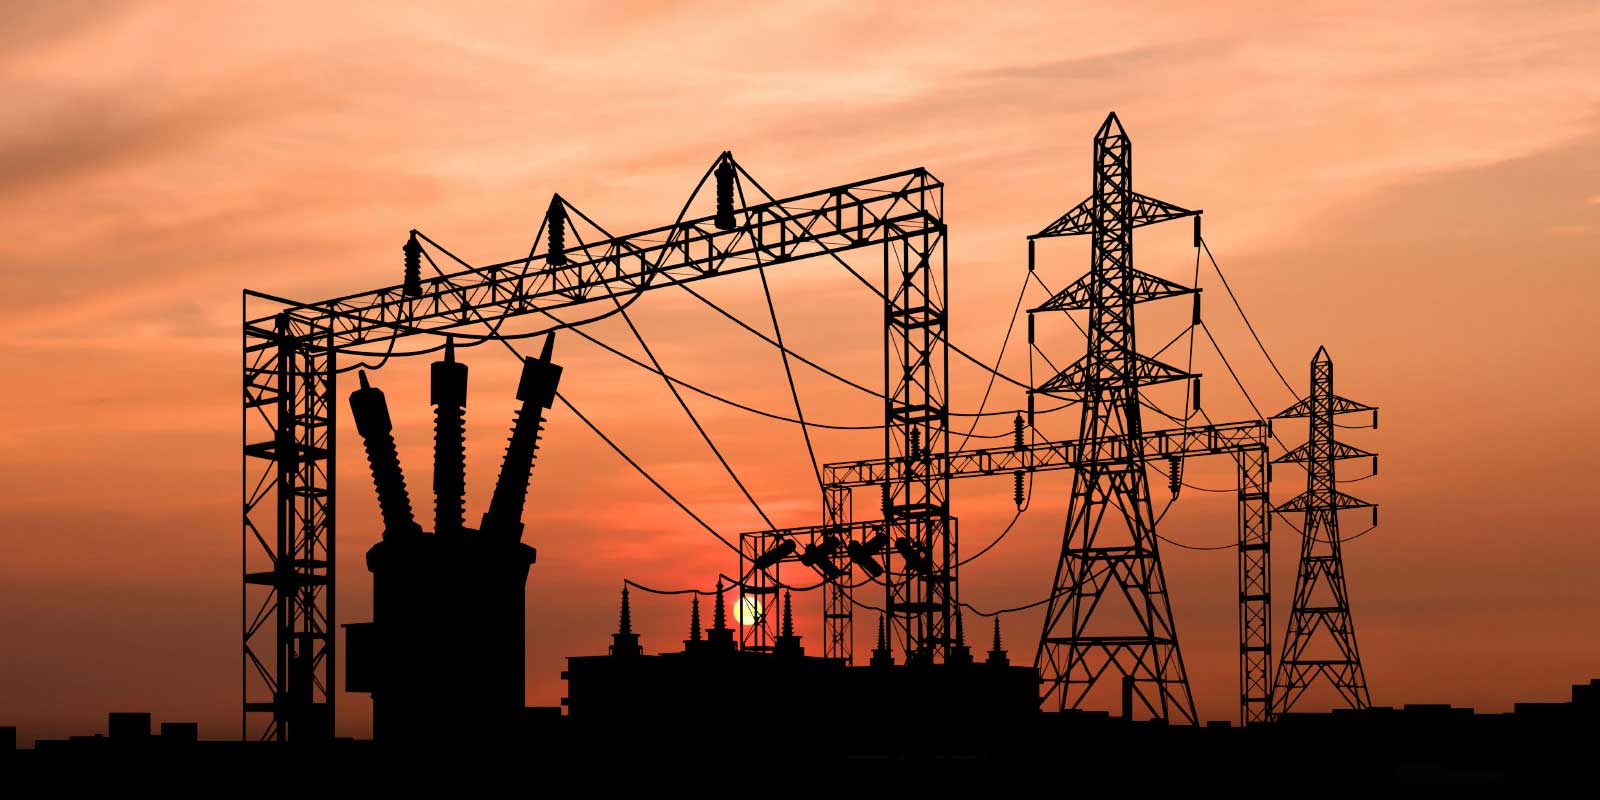 latest research topics in power system engineering